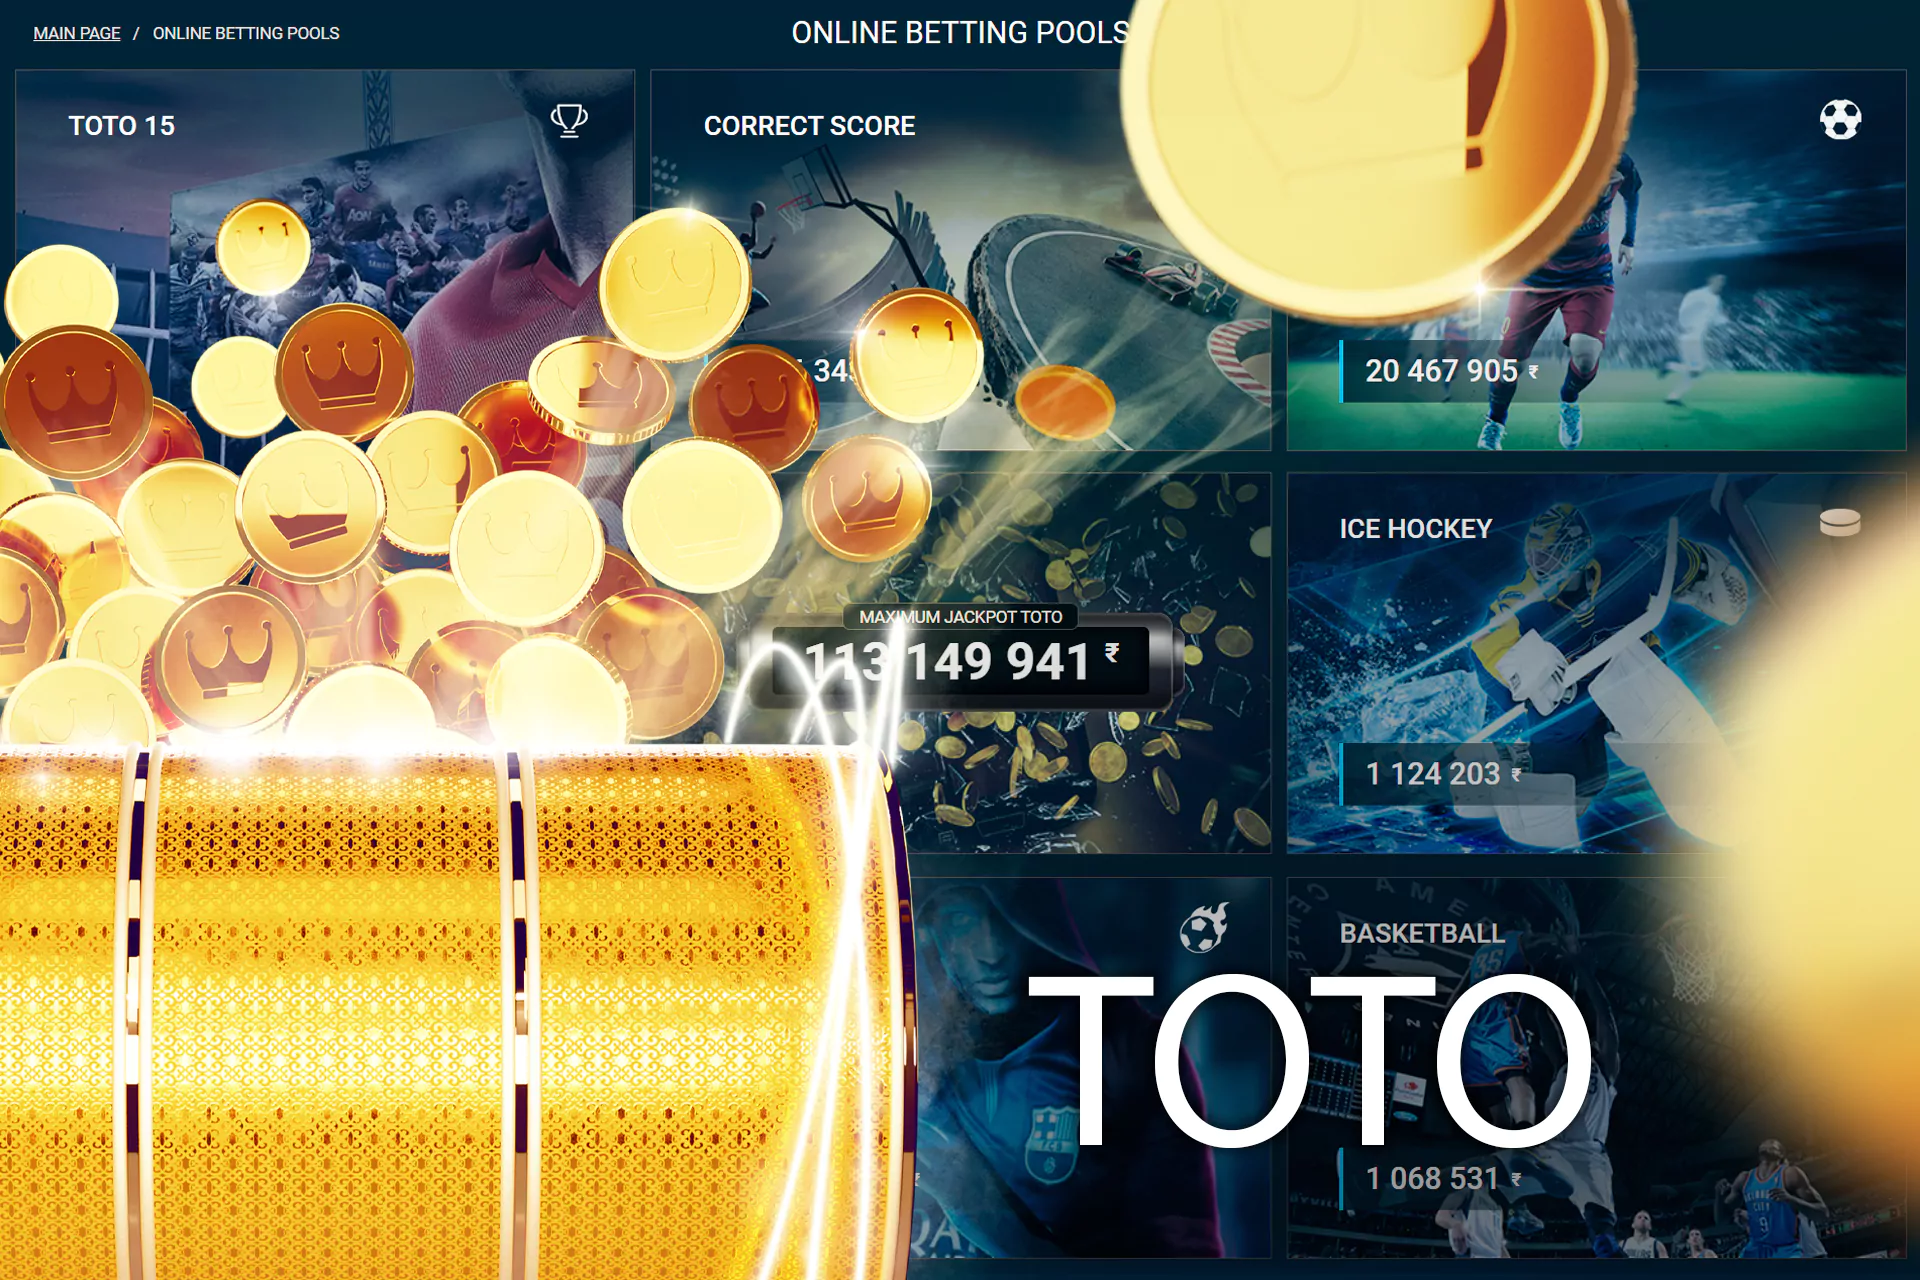 1xBet users from India can play TOTO online.